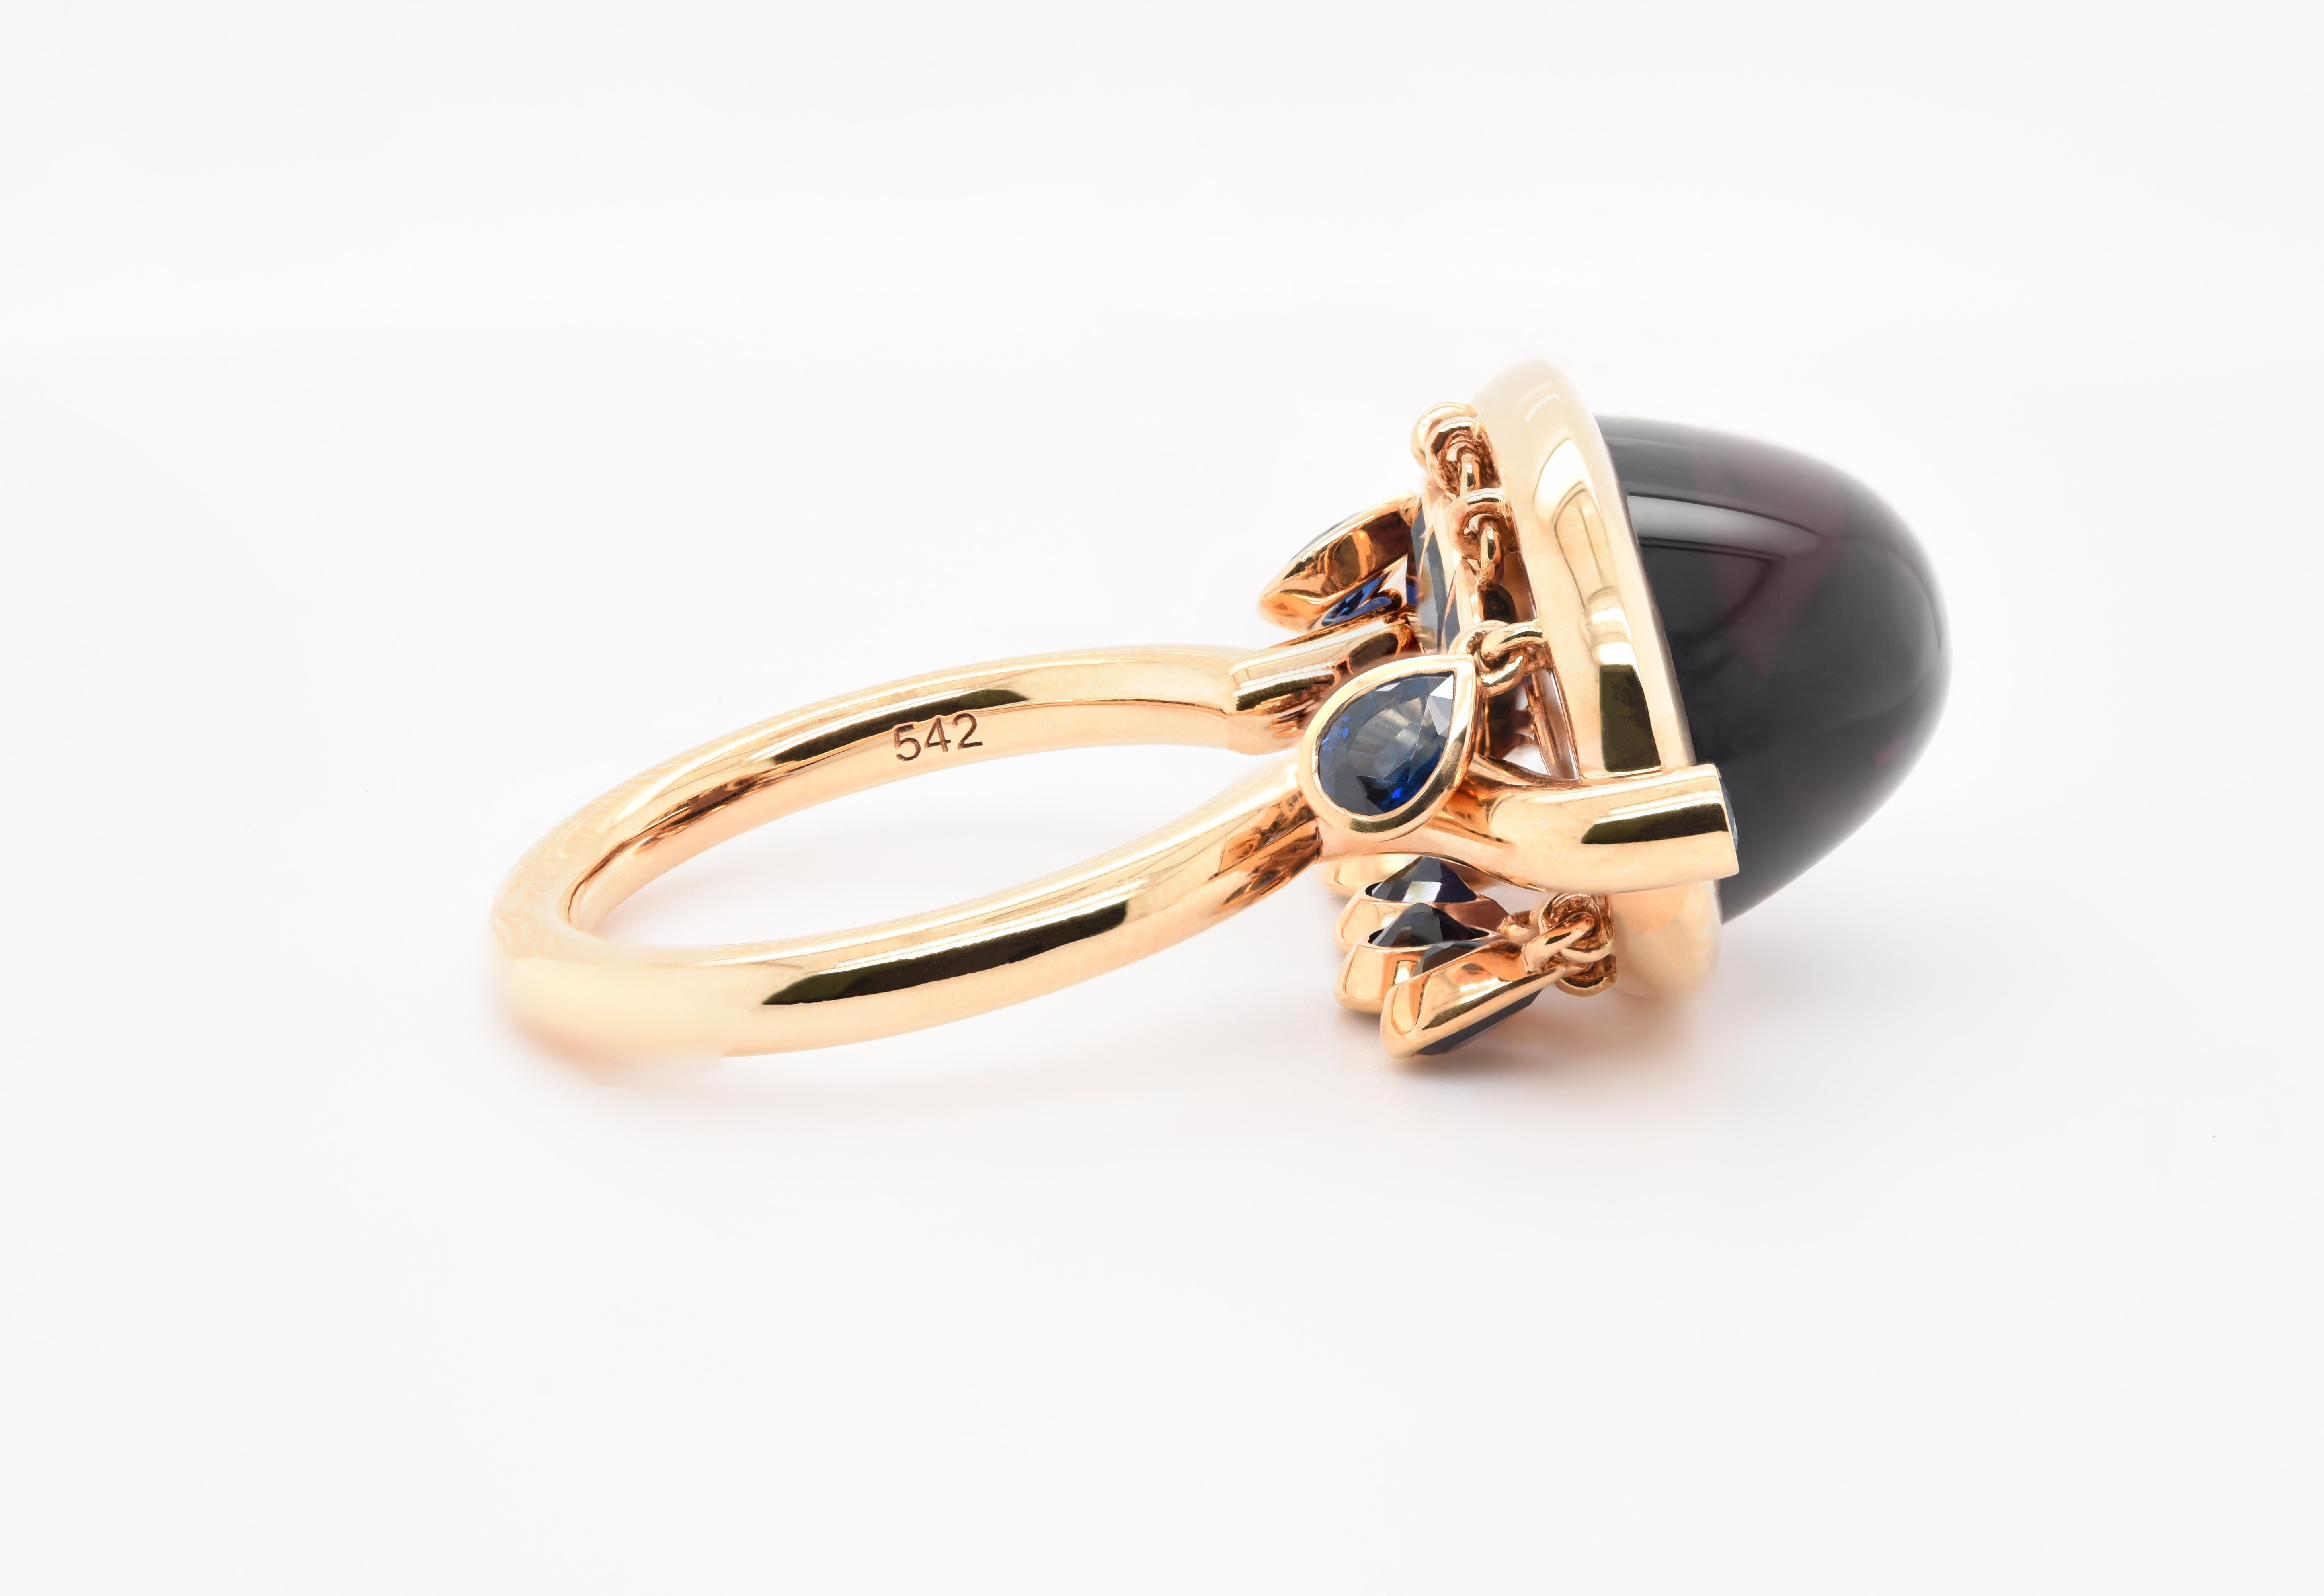 JAG New York created for you this Oval Amethyst Ring with Briolette  Sapphire Drops in 20K Yellow Gold that is comprised of 12.75 carat oval Amethyst 2.35 carats in Sapphires all set in 20K yellow gold. A true masterpiece!

Unapologetic